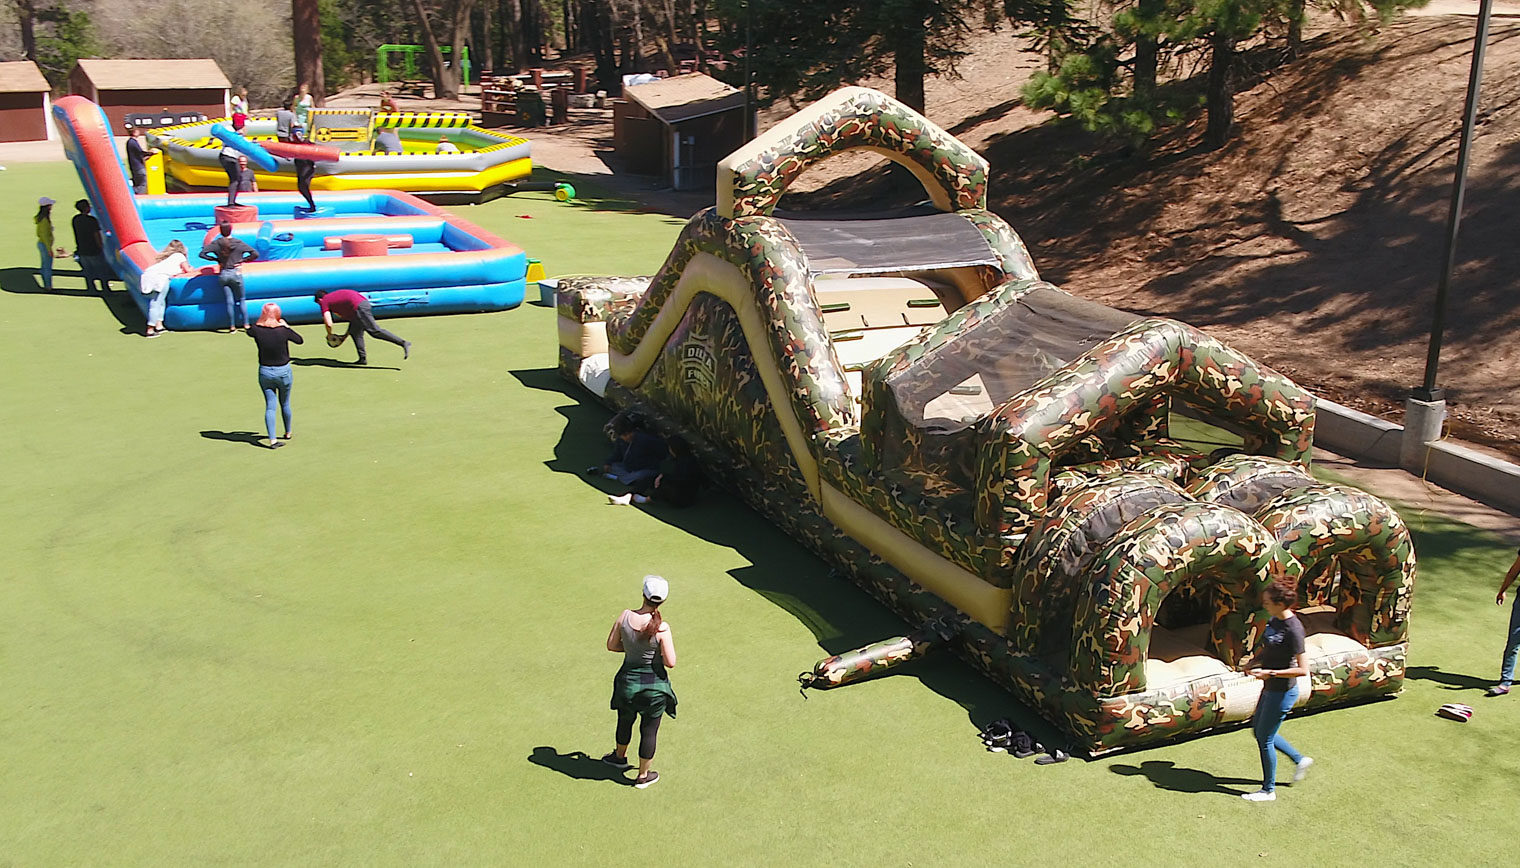 An inflatable obstacle course.